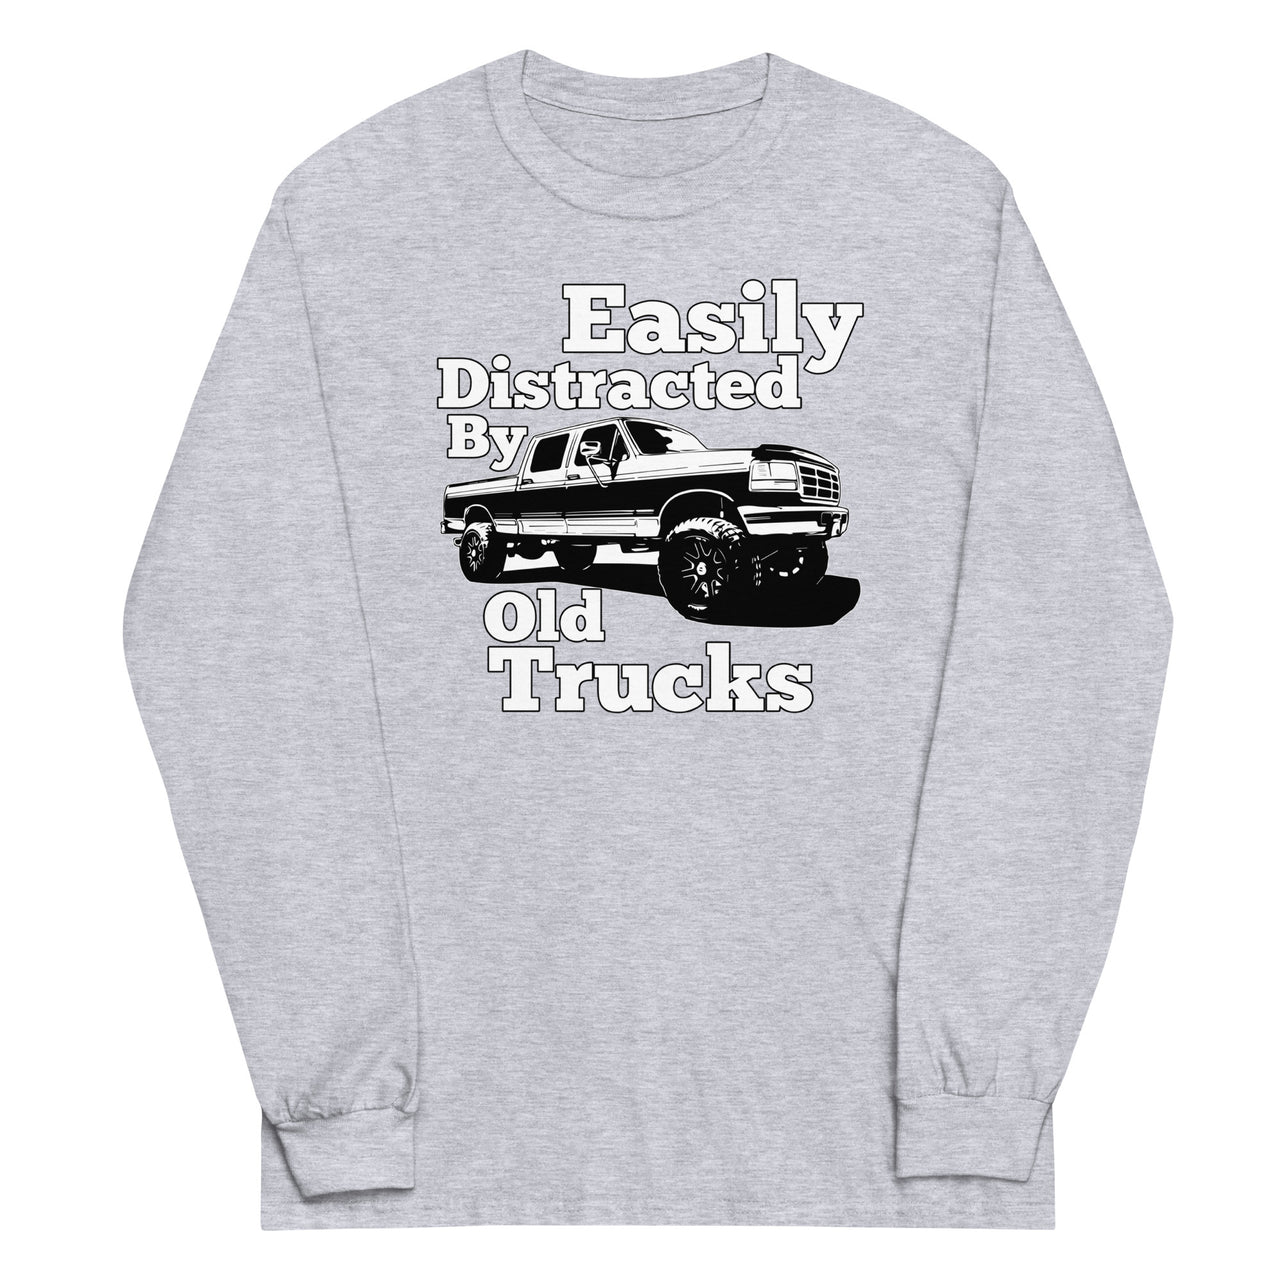 sport grey OBS Truck Long Sleeve Shirt Crew Cab - Easily Distracted By Old Trucks